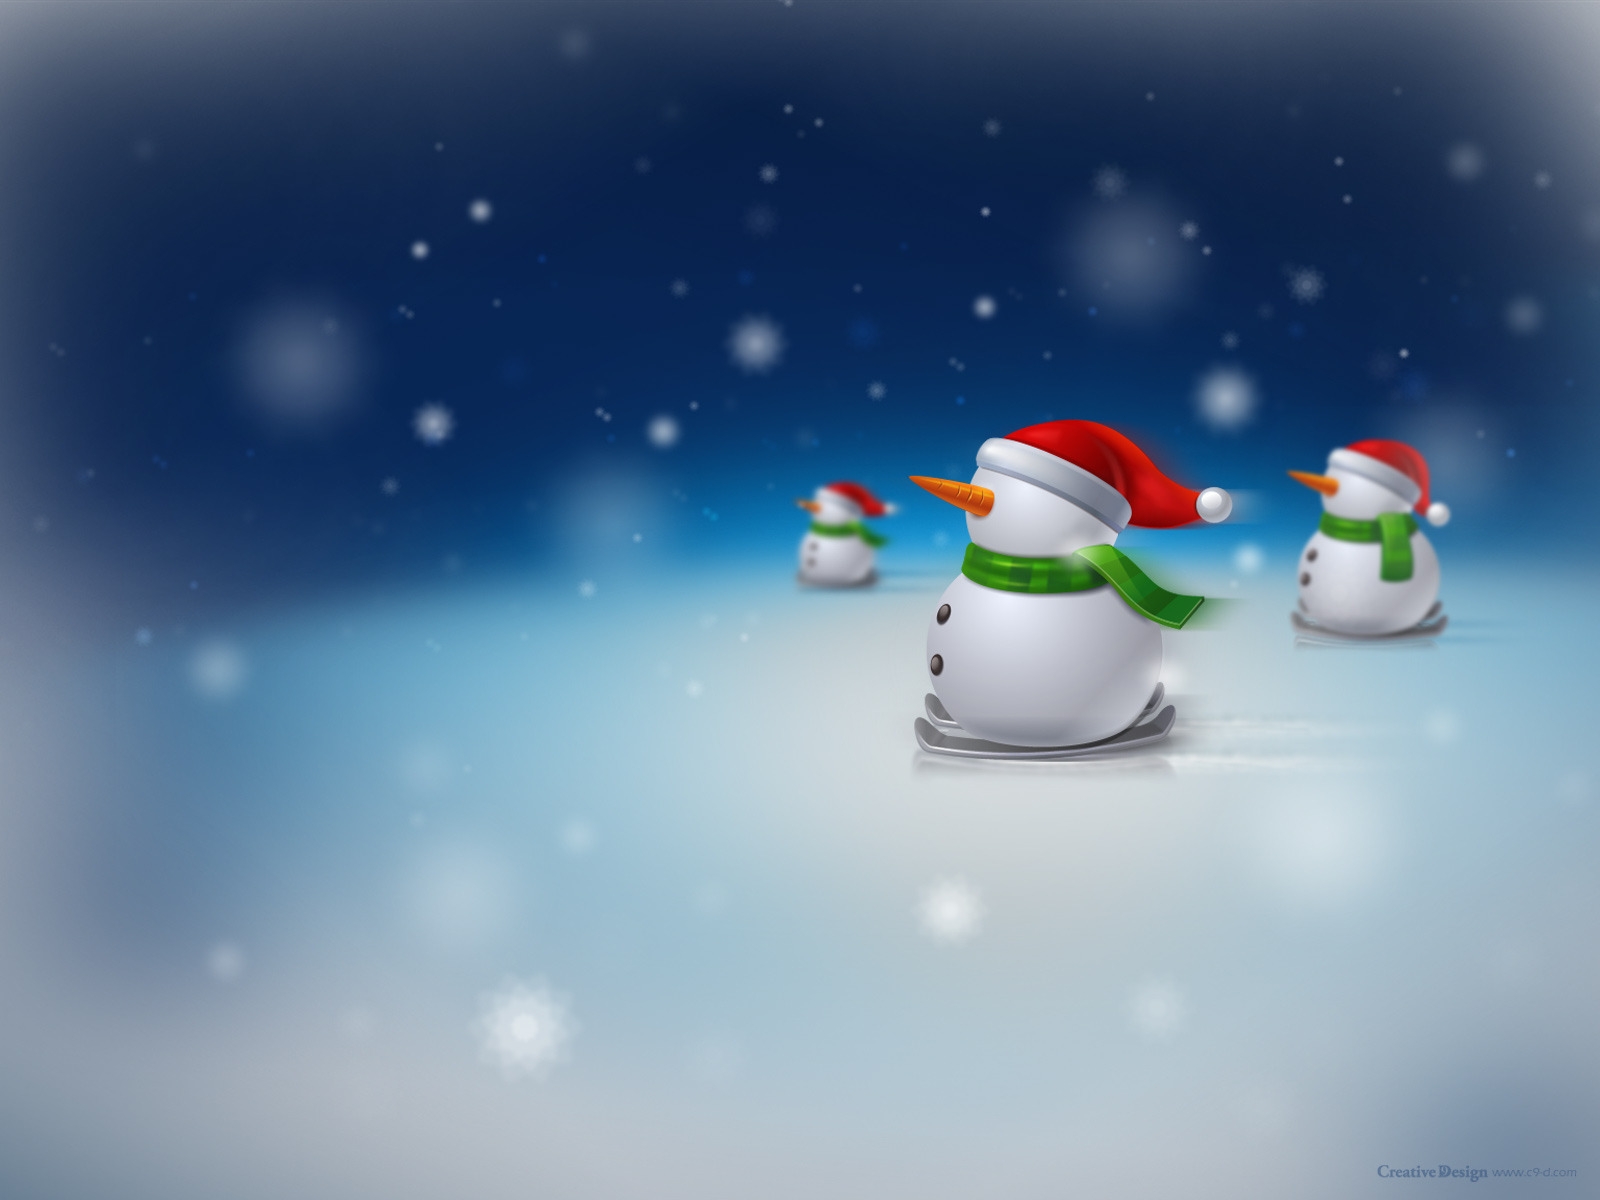 Snowman for 1600 x 1200 resolution